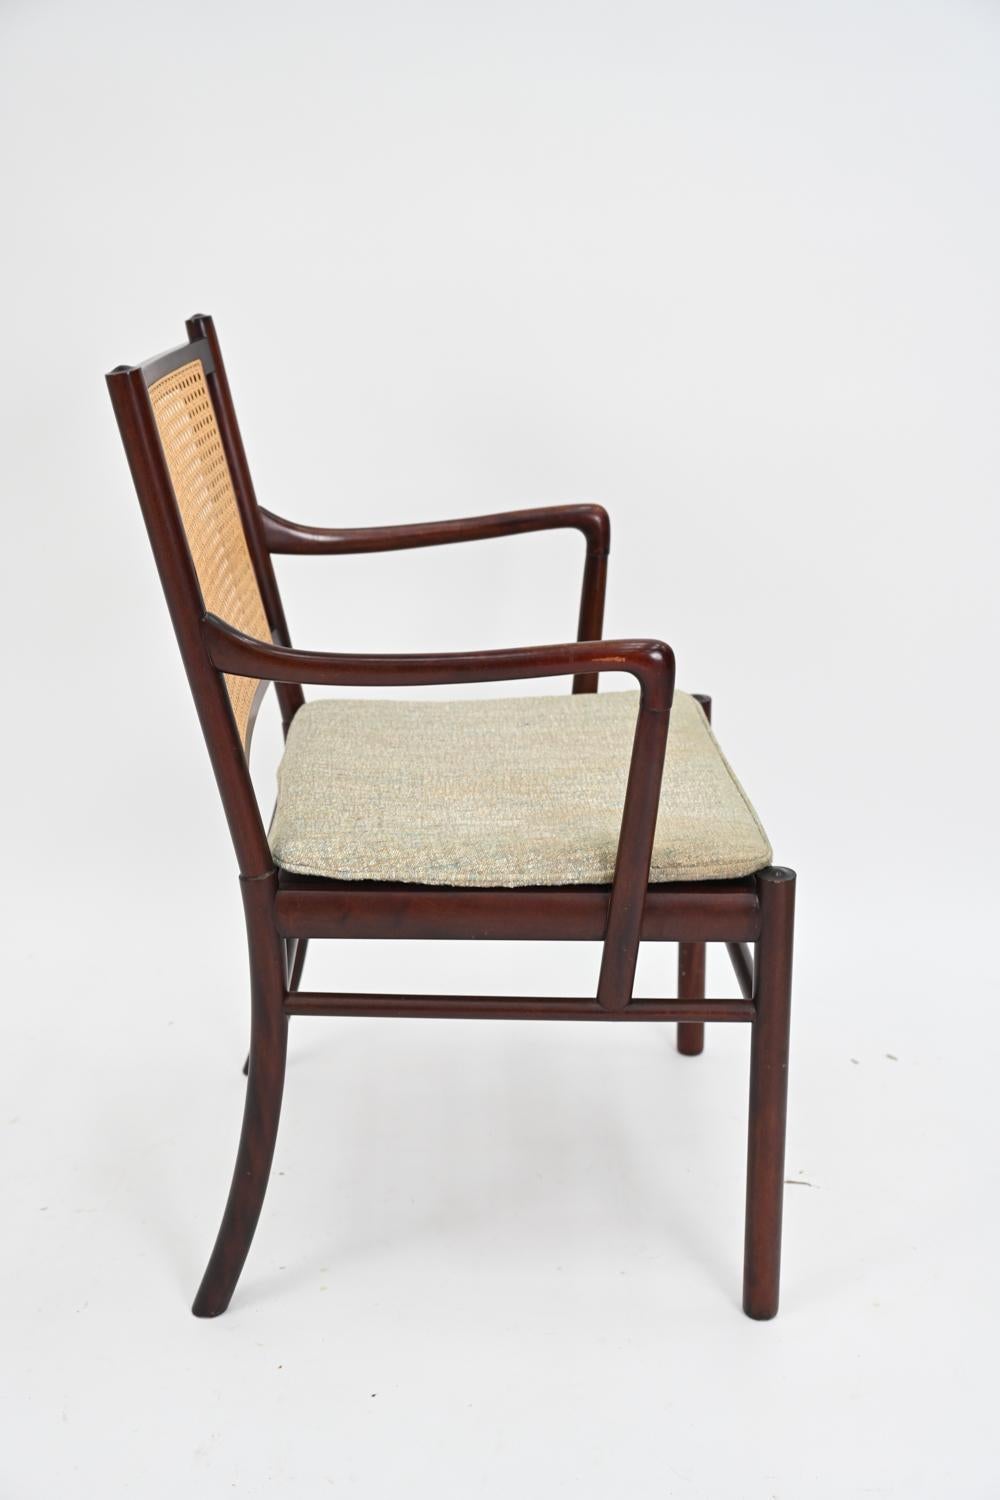 Model PJ-301 Colonial Armchair by Ole Wanscher for Poul Jeppesen, 1960s 5